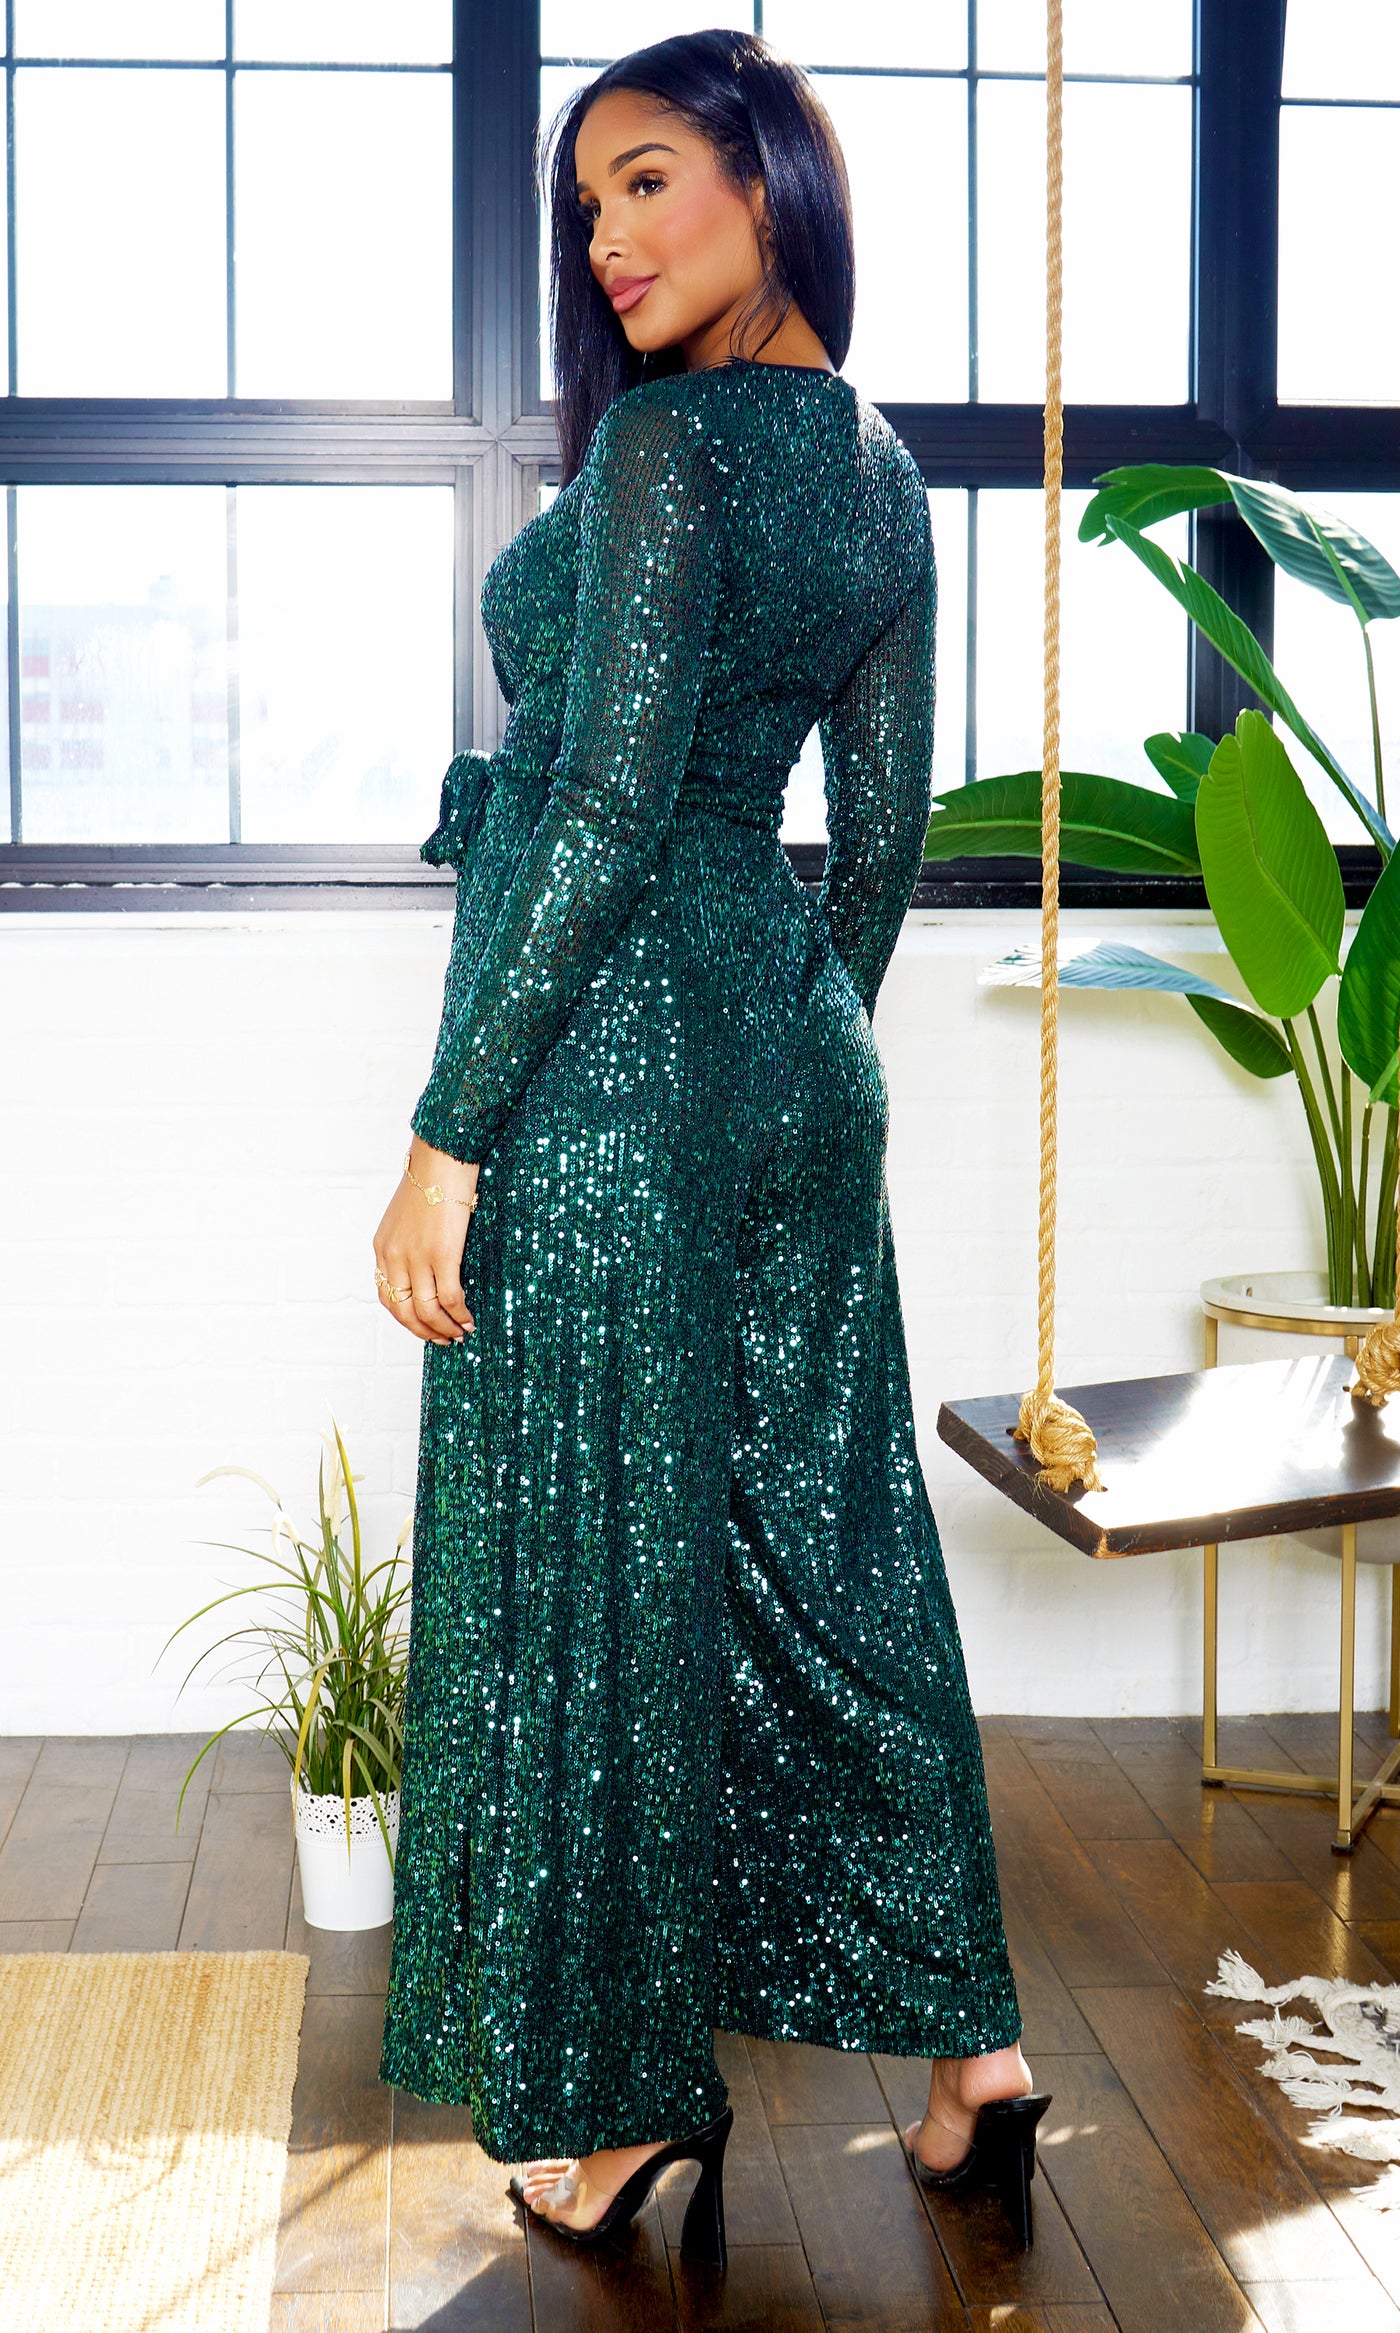 Glitz V-Neck Sequin Jumpsuit - Green - Cutely Covered